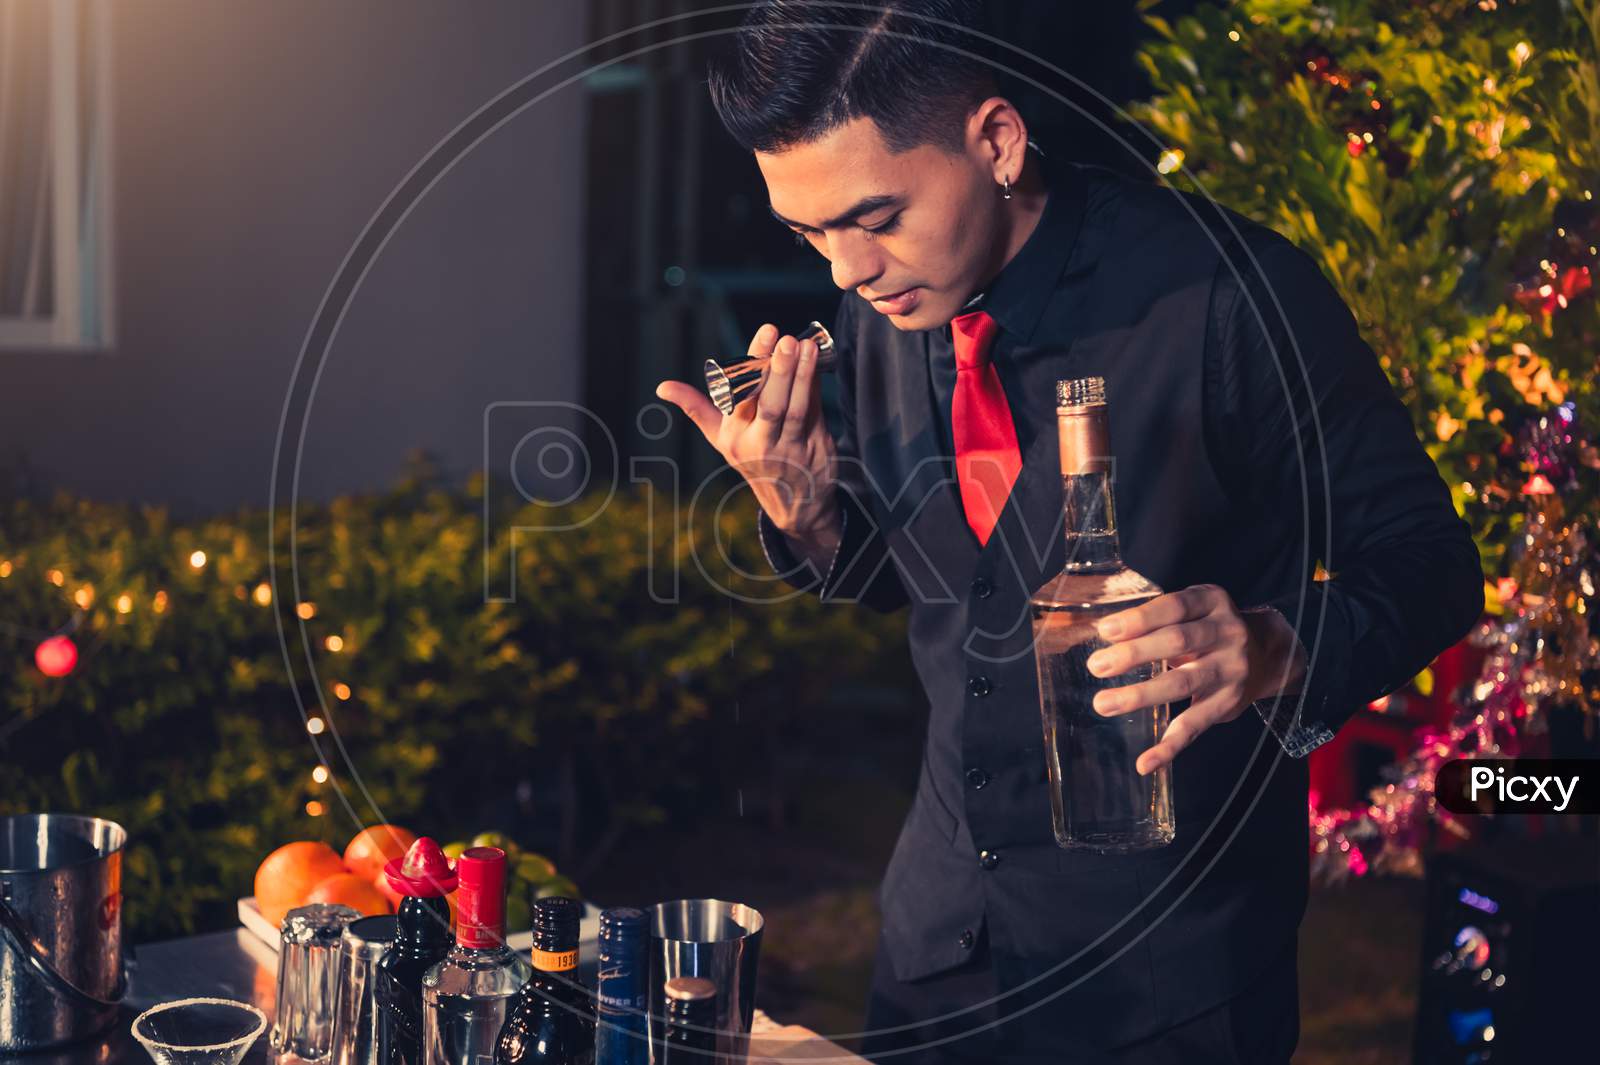 Professional Bartender Preparing Fresh Lime Lemonade Cocktail In Drinking Wine Glass With Ice At Night Bar Clubbing Counter. Occupation And People Lifestyles Concept. Outdoor Background